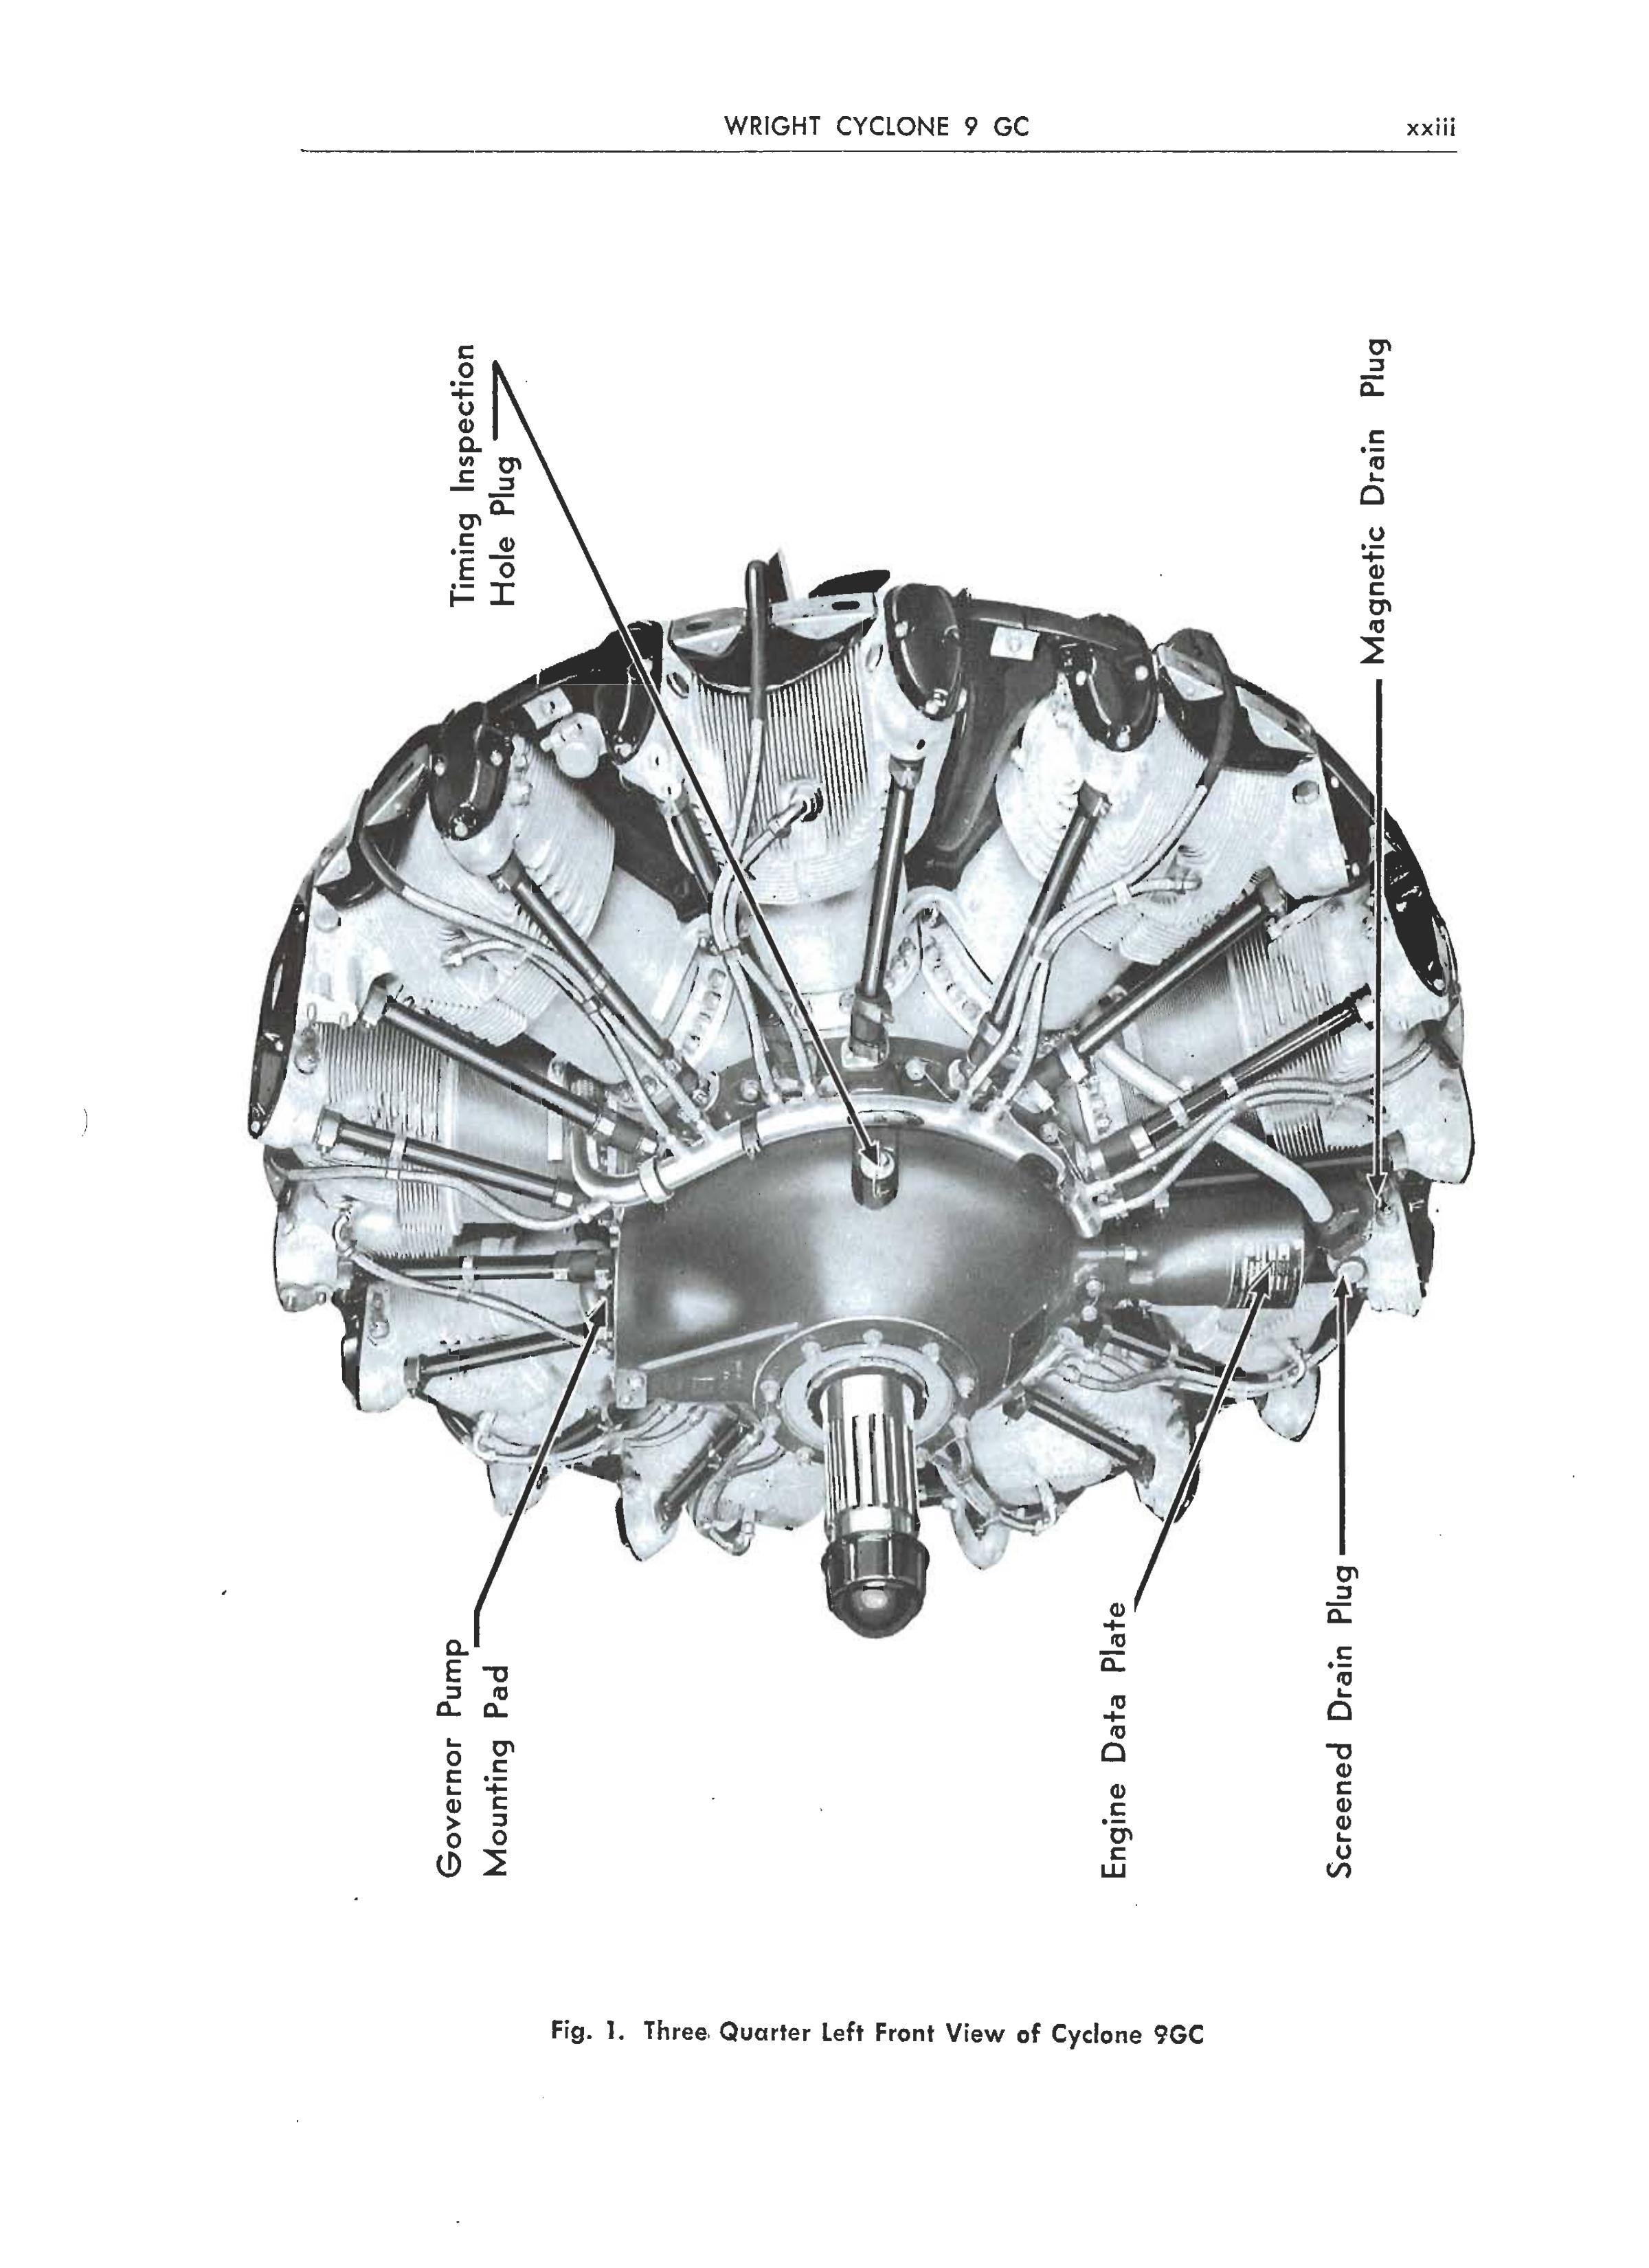 Sample page 20 from AirCorps Library document: Overhaul Manual for Wright Cyclone 9 GC Engines